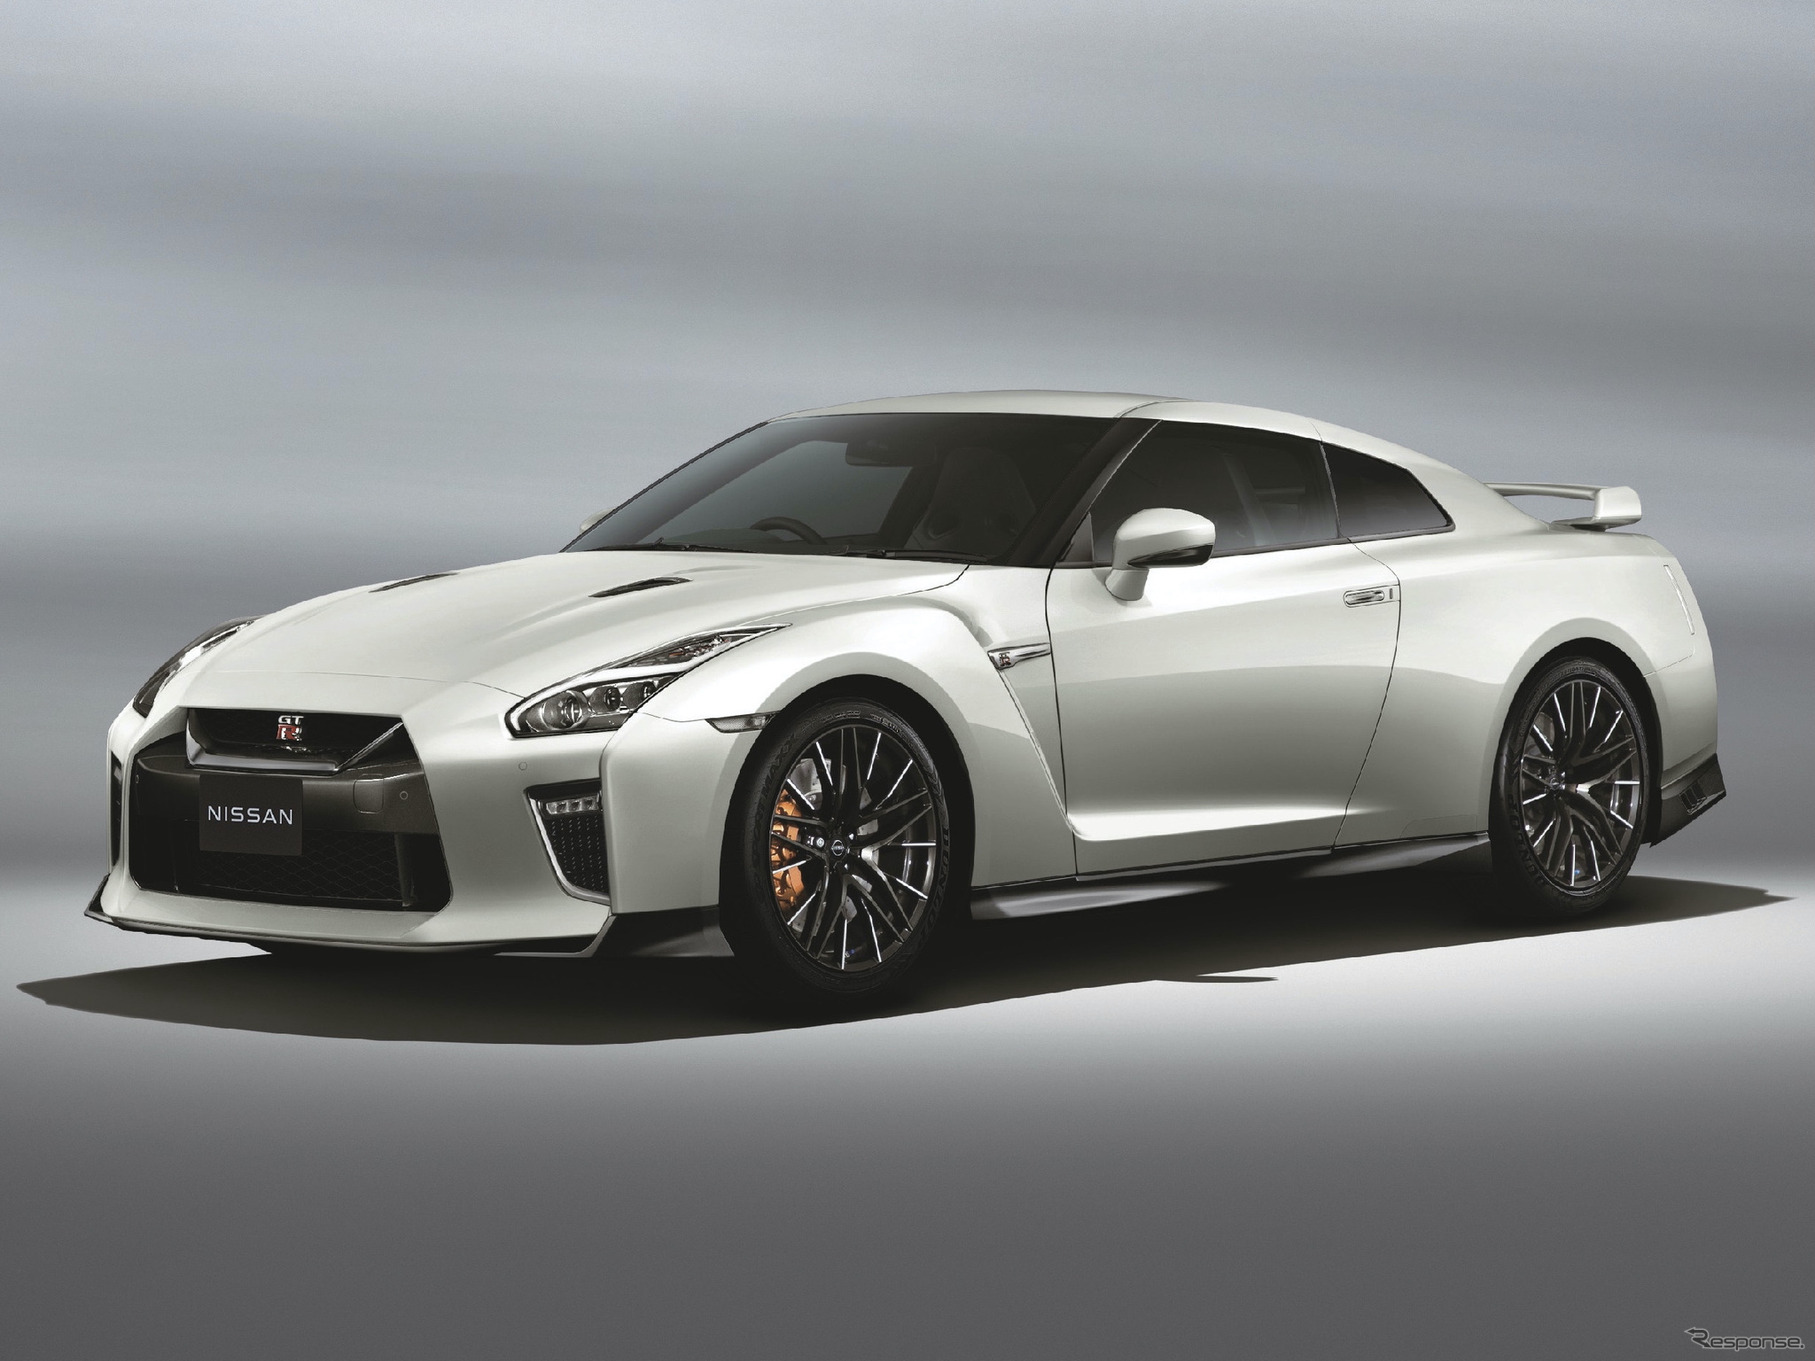 GT-R Pure edition